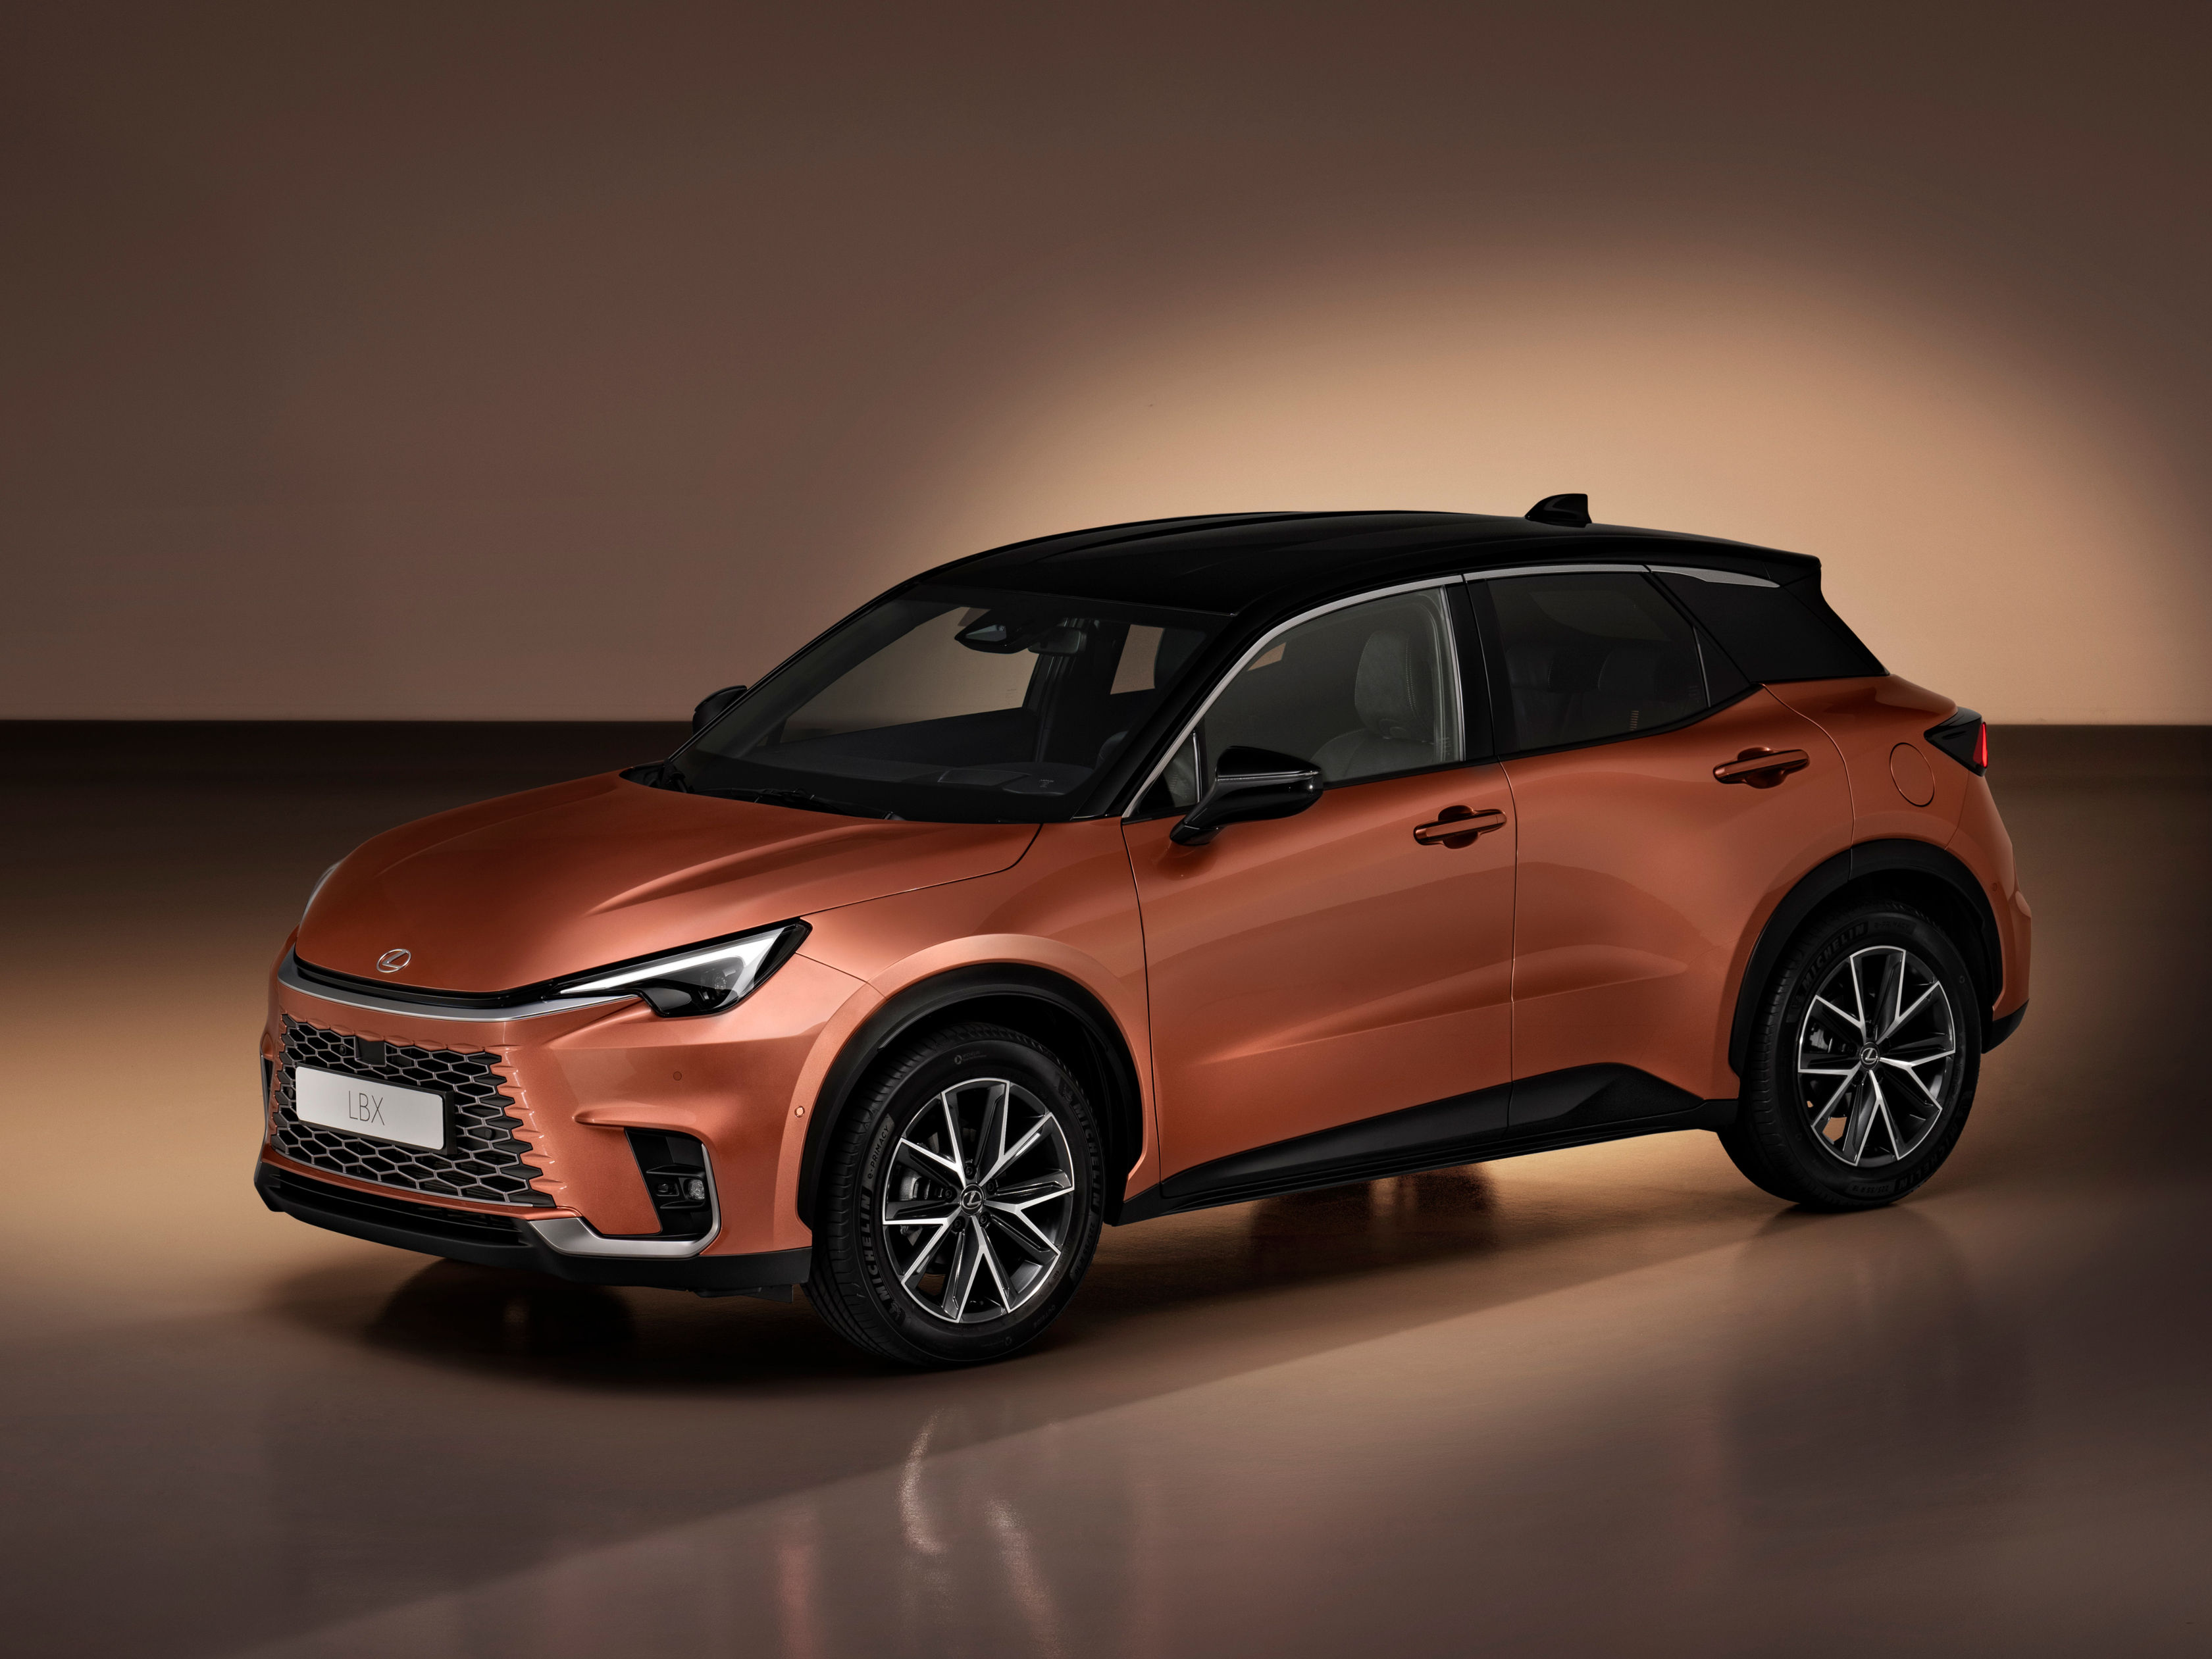 New Lexus LBX Breaks Cover As Smallest Premium Crossover From The